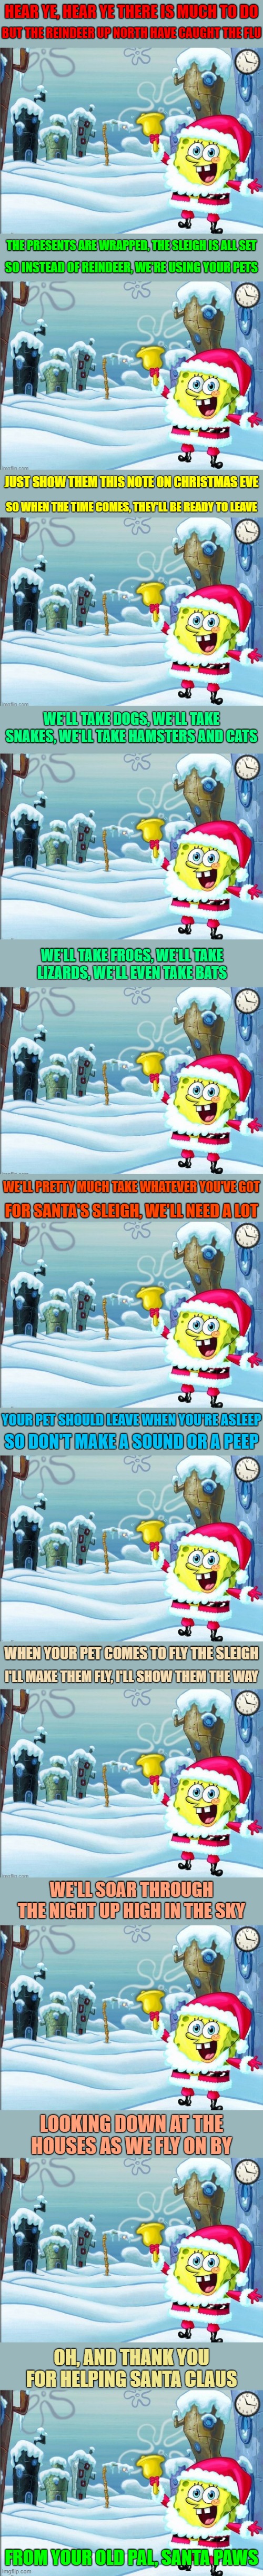 "Come Help Santa/Spongebob" Get Ready for Spongebob Christmas Weekend Dec. 11-13 a Kraziness_all_the_way and EGOS event | HEAR YE, HEAR YE THERE IS MUCH TO DO; BUT THE REINDEER UP NORTH HAVE CAUGHT THE FLU; THE PRESENTS ARE WRAPPED, THE SLEIGH IS ALL SET; SO INSTEAD OF REINDEER, WE'RE USING YOUR PETS; JUST SHOW THEM THIS NOTE ON CHRISTMAS EVE; SO WHEN THE TIME COMES, THEY'LL BE READY TO LEAVE; WE'LL TAKE DOGS, WE'LL TAKE SNAKES, WE'LL TAKE HAMSTERS AND CATS; WE'LL TAKE FROGS, WE'LL TAKE LIZARDS, WE'LL EVEN TAKE BATS; WE'LL PRETTY MUCH TAKE WHATEVER YOU'VE GOT; FOR SANTA'S SLEIGH, WE'LL NEED A LOT; YOUR PET SHOULD LEAVE WHEN YOU'RE ASLEEP; SO DON'T MAKE A SOUND OR A PEEP; WHEN YOUR PET COMES TO FLY THE SLEIGH; I'LL MAKE THEM FLY, I'LL SHOW THEM THE WAY; WE'LL SOAR THROUGH THE NIGHT UP HIGH IN THE SKY; LOOKING DOWN AT THE HOUSES AS WE FLY ON BY; OH, AND THANK YOU FOR HELPING SANTA CLAUS; FROM YOUR OLD PAL, SANTA PAWS | image tagged in memes,spongebob christmas weekend,egos,kraziness_all_the_way,spongebob,christmas rhymes | made w/ Imgflip meme maker